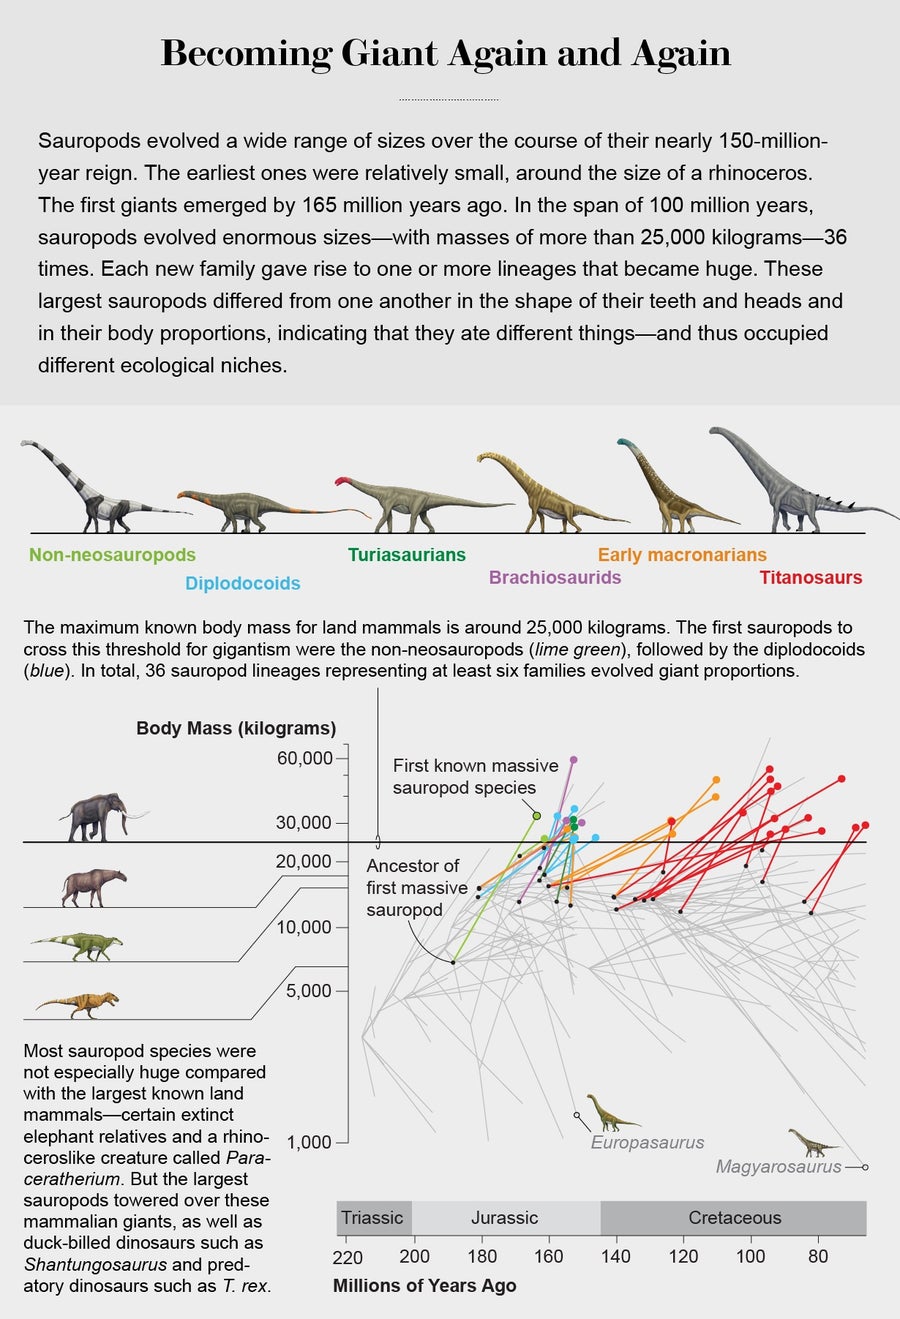 Chart plots massive sauropod species according to their body mass and how long ago they and their respective ancestors evolved, highlighting 36 separate lineages that grew to more than 25,000 kg.